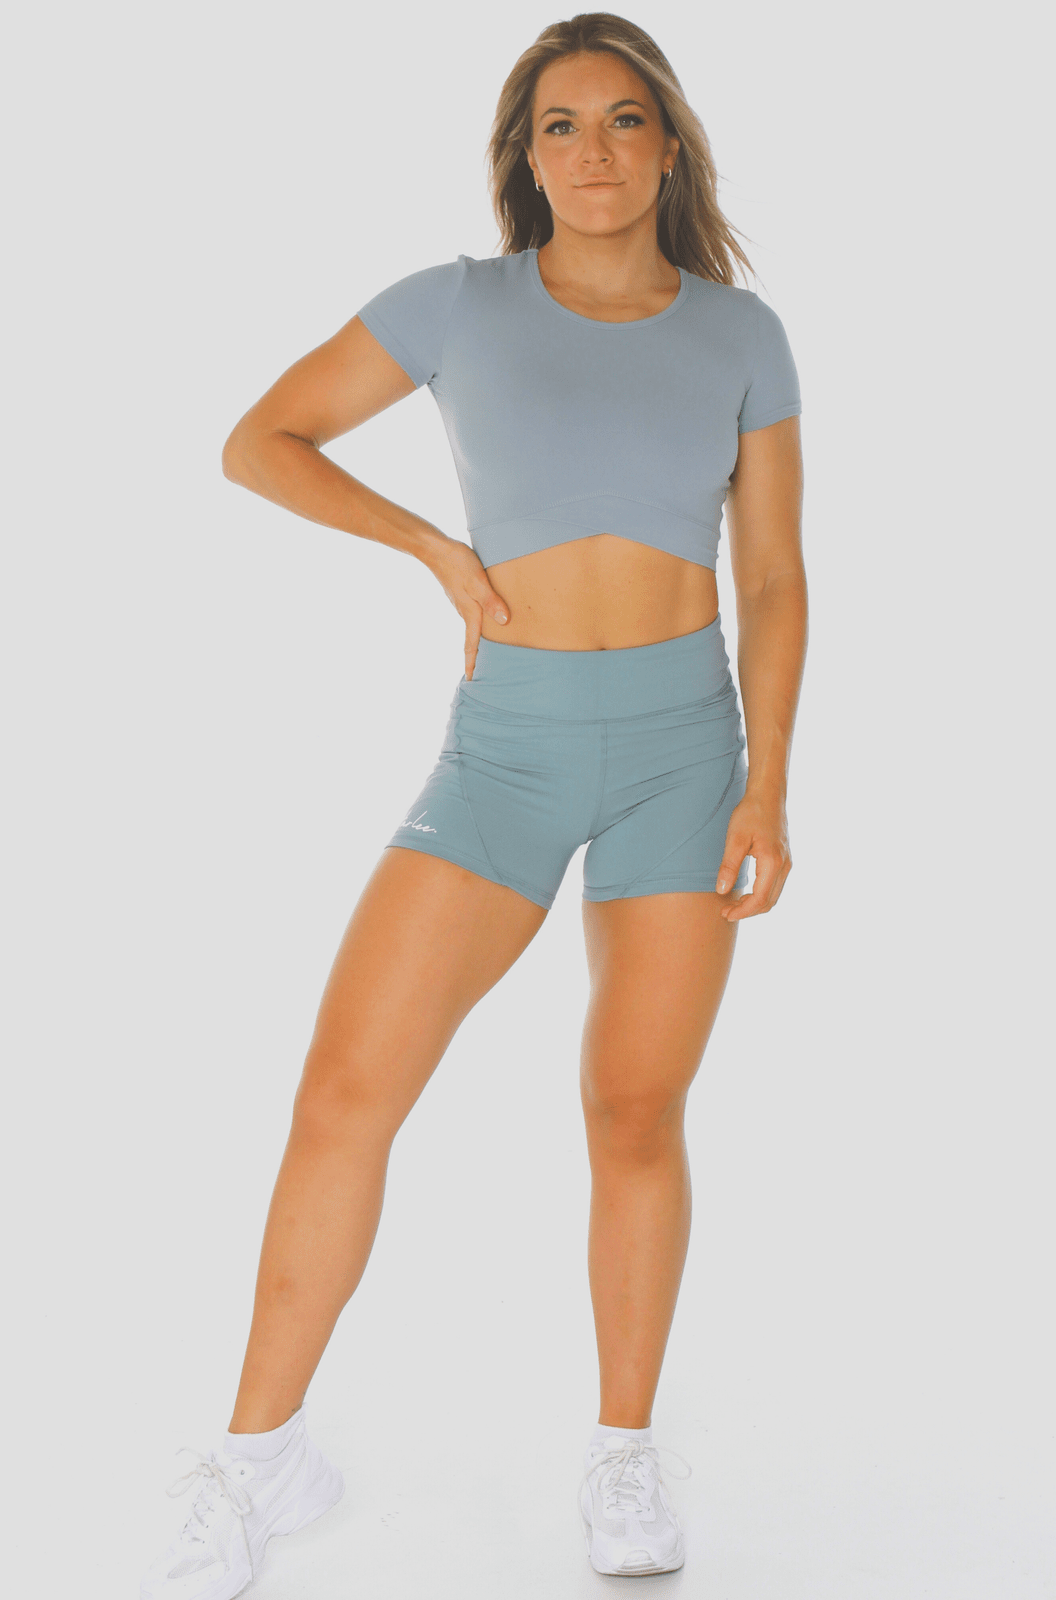 Performance Cropped Training Top - Jade Blue